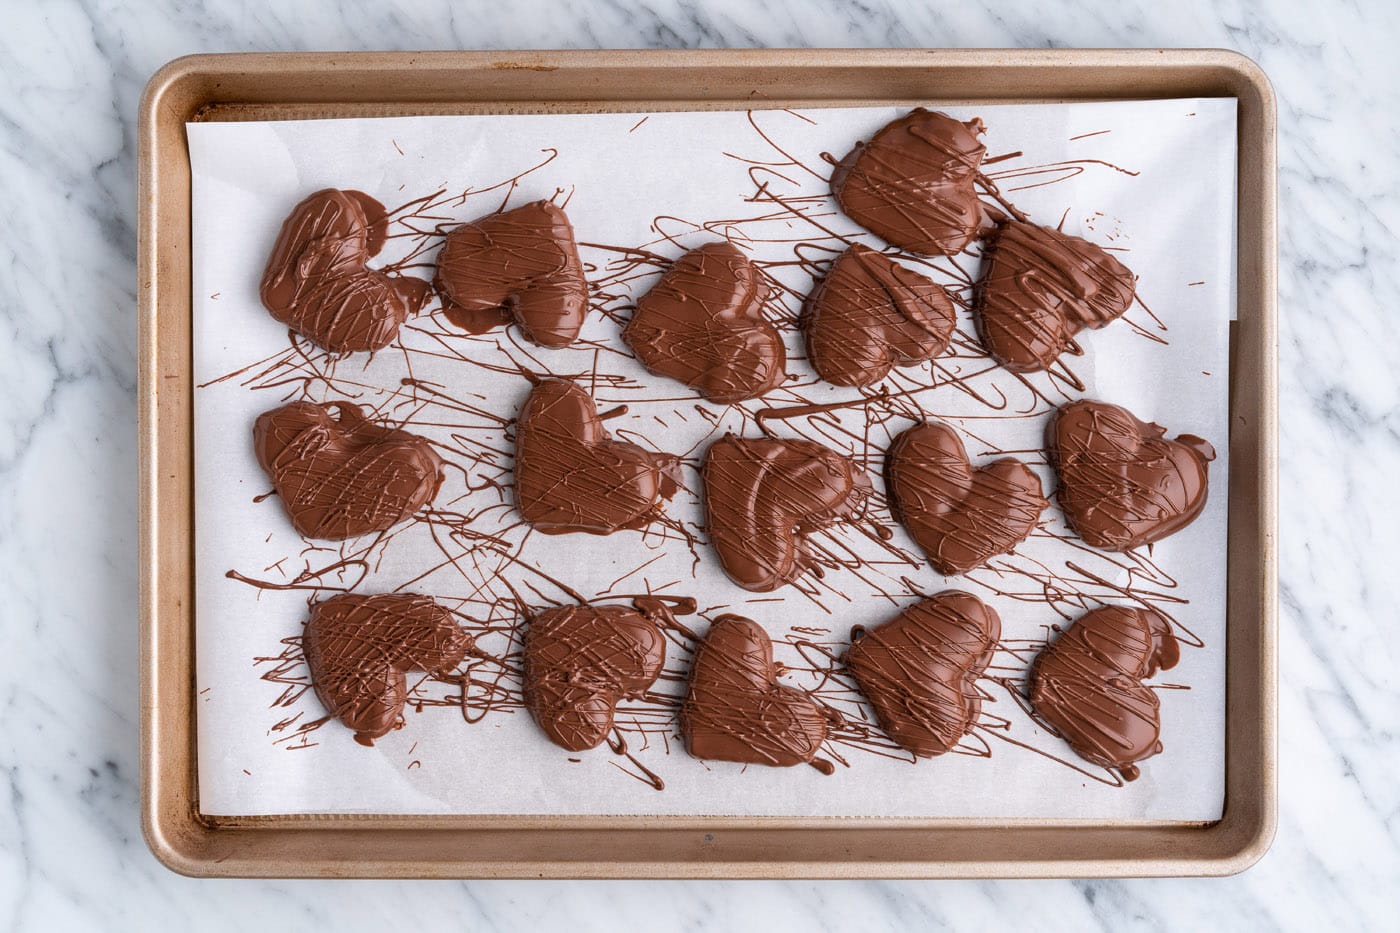 chocolate peanut butter hearts drizzled with extra chocolate